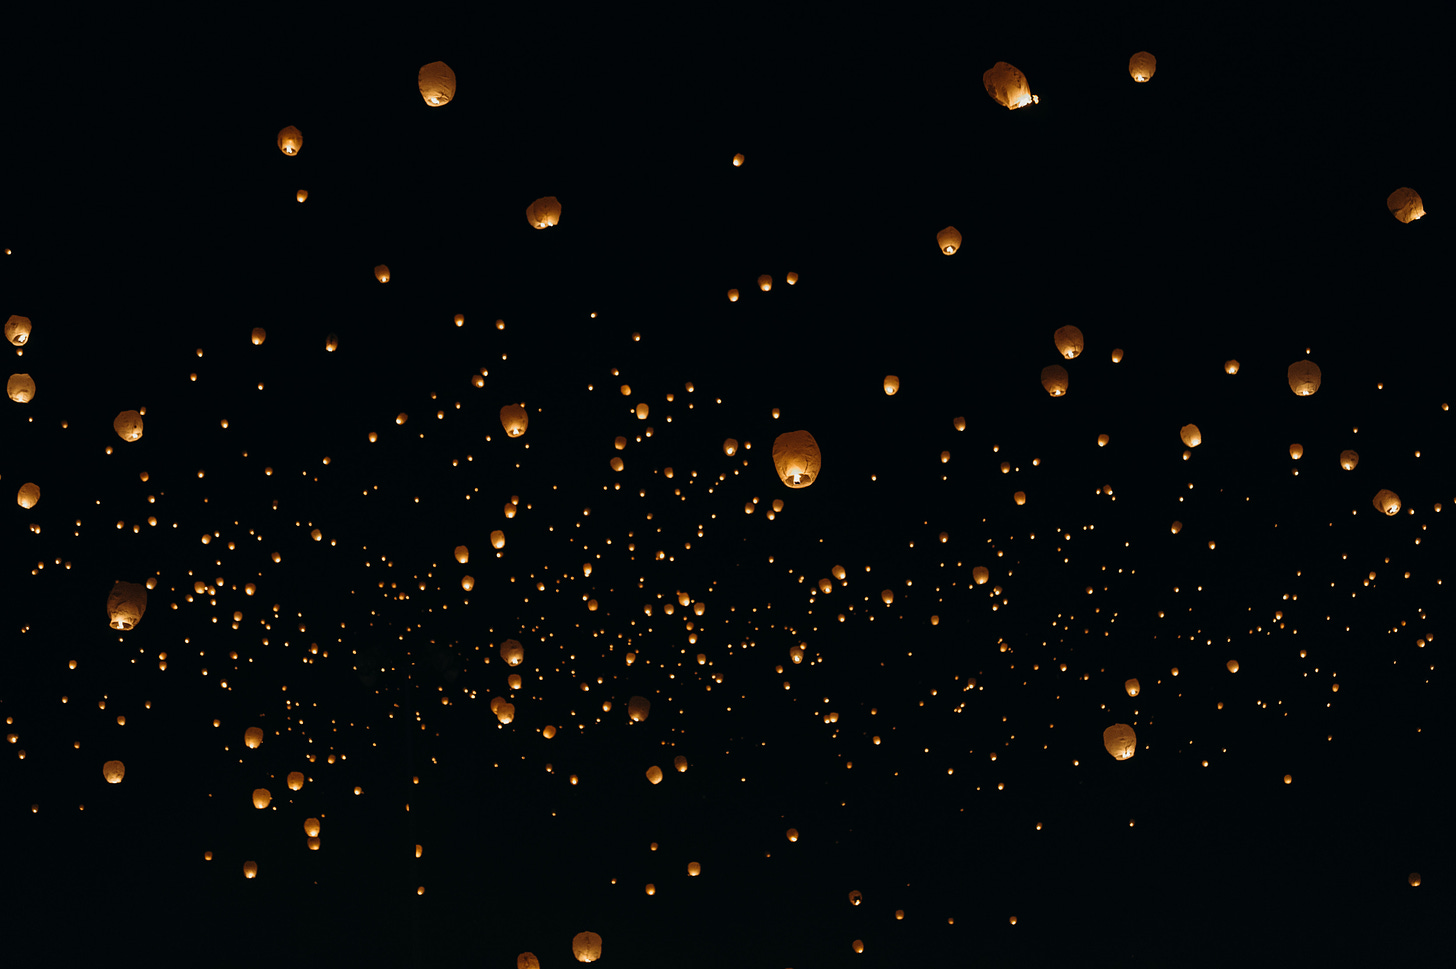 Photo of dozens of paper lanterns carrying lit candles, floating against a black background